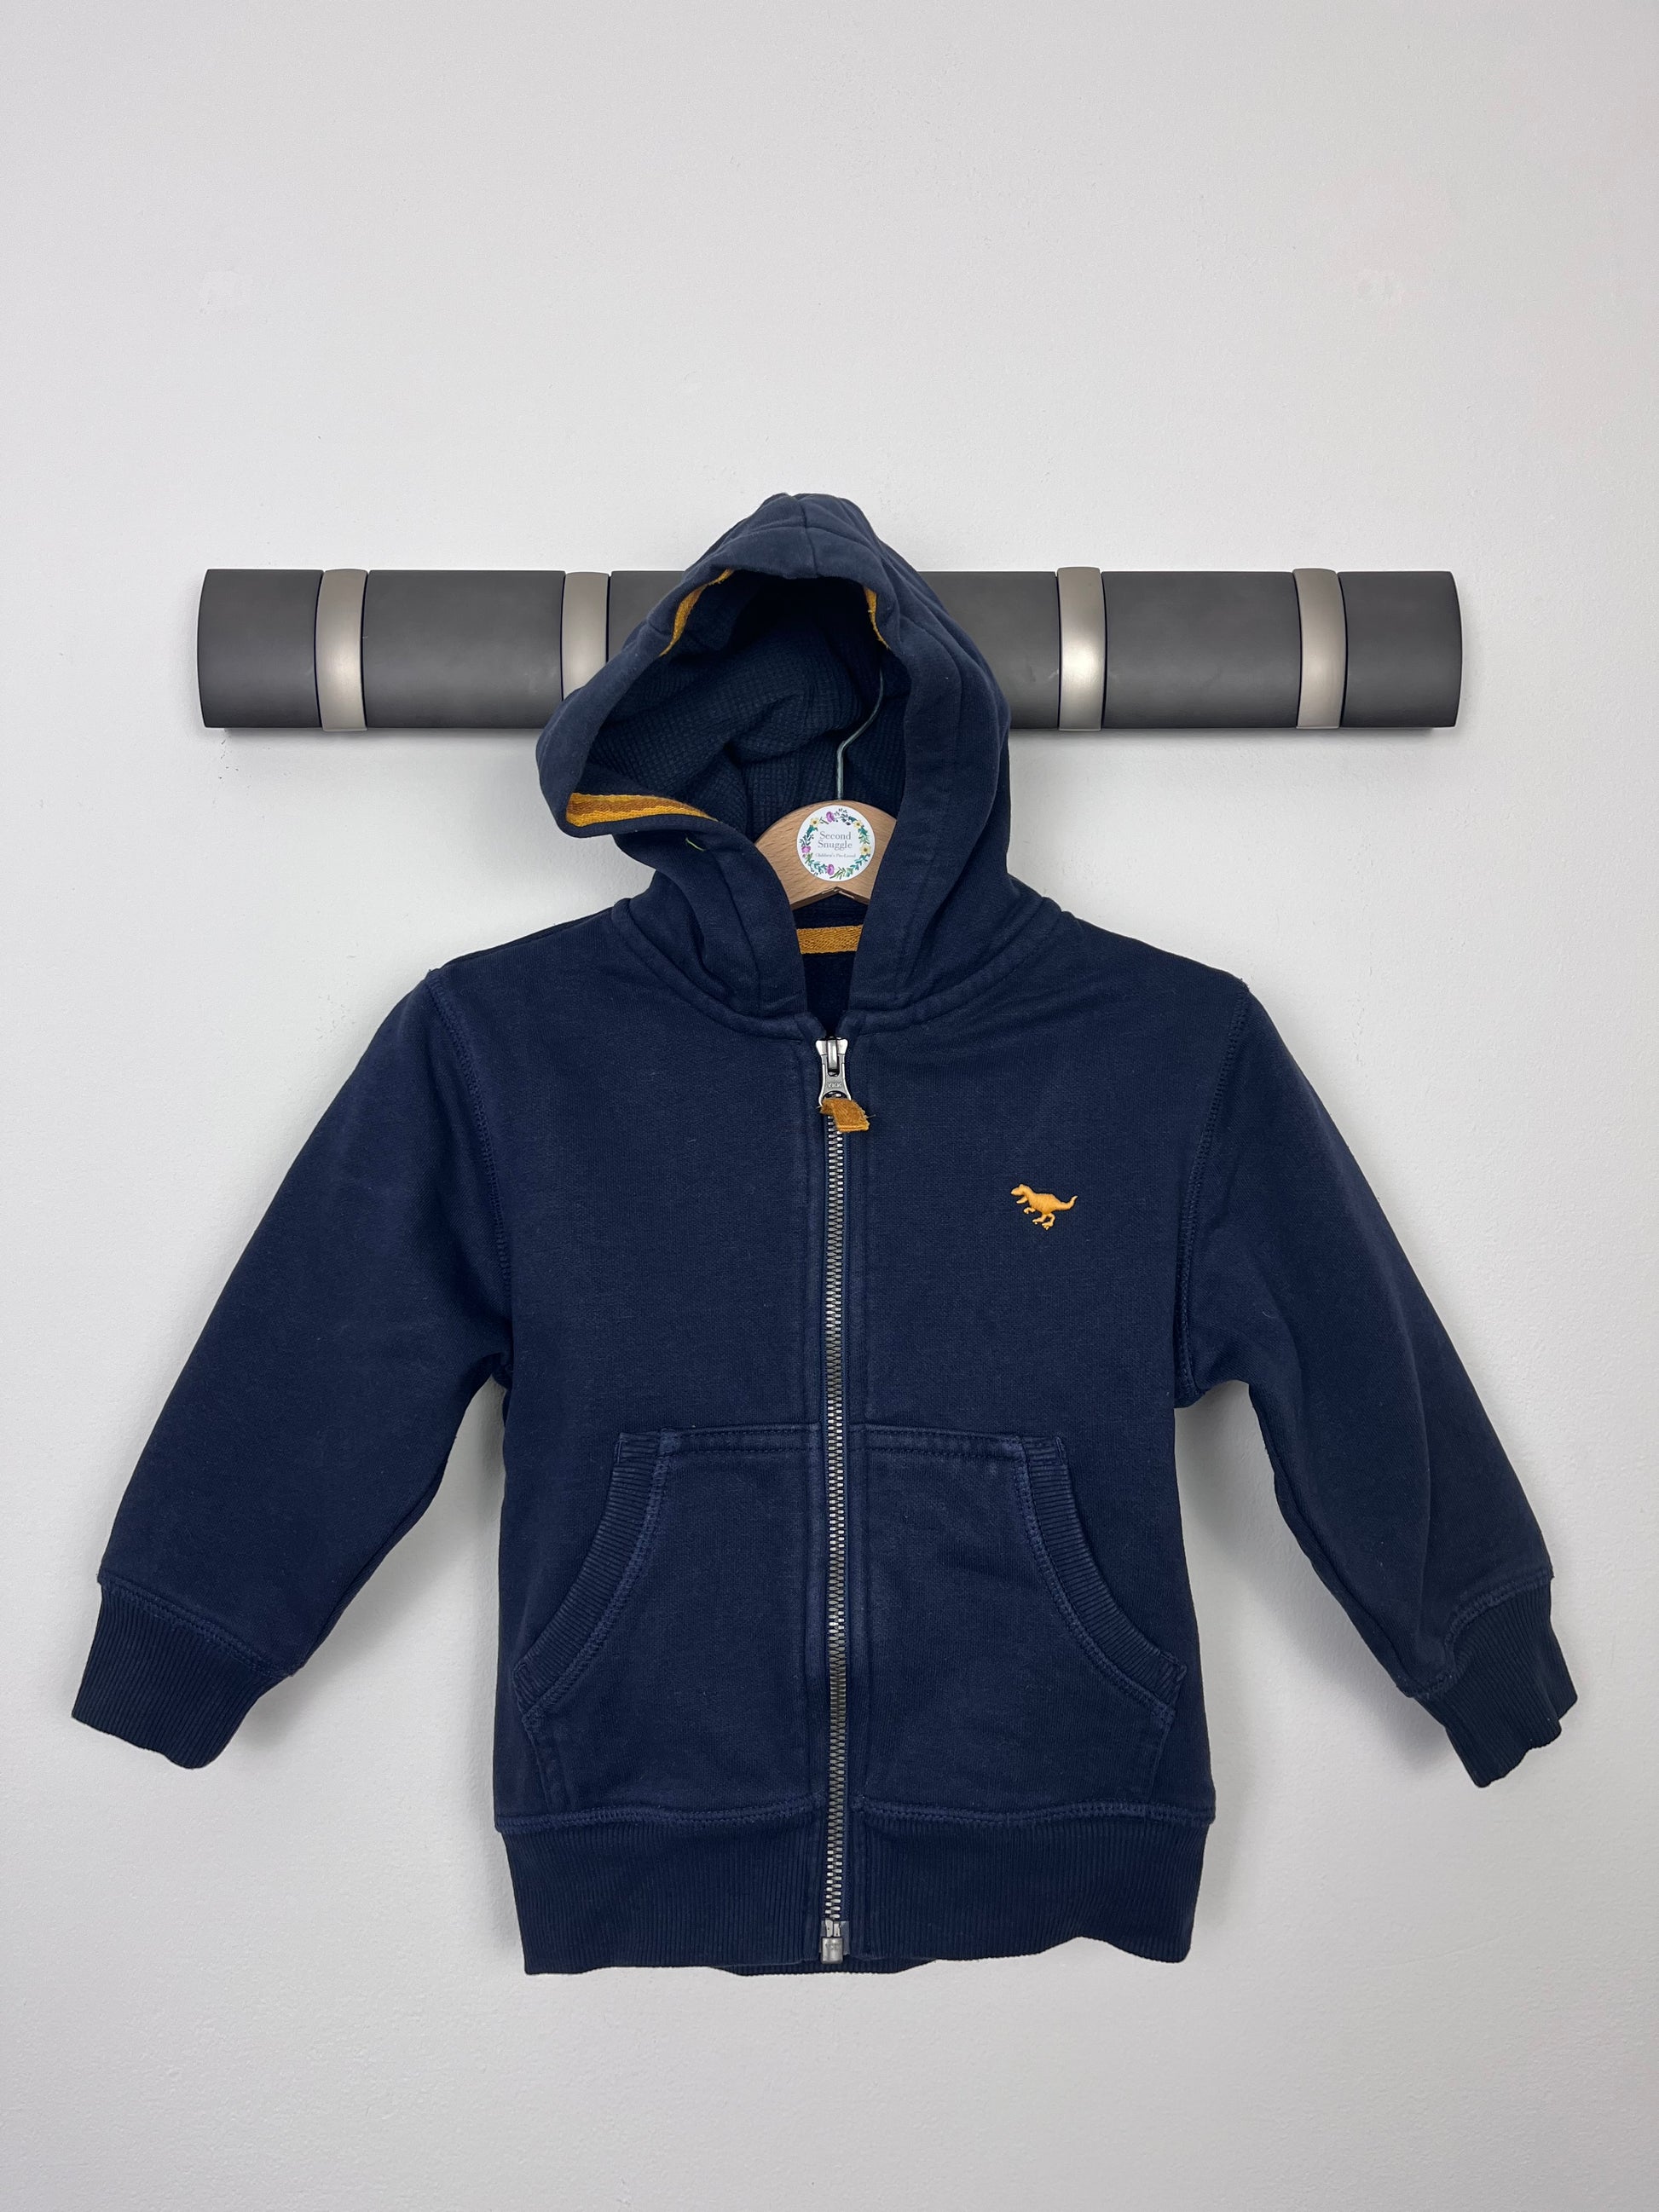 Next 18-24 Months-Hoodies-Second Snuggle Preloved